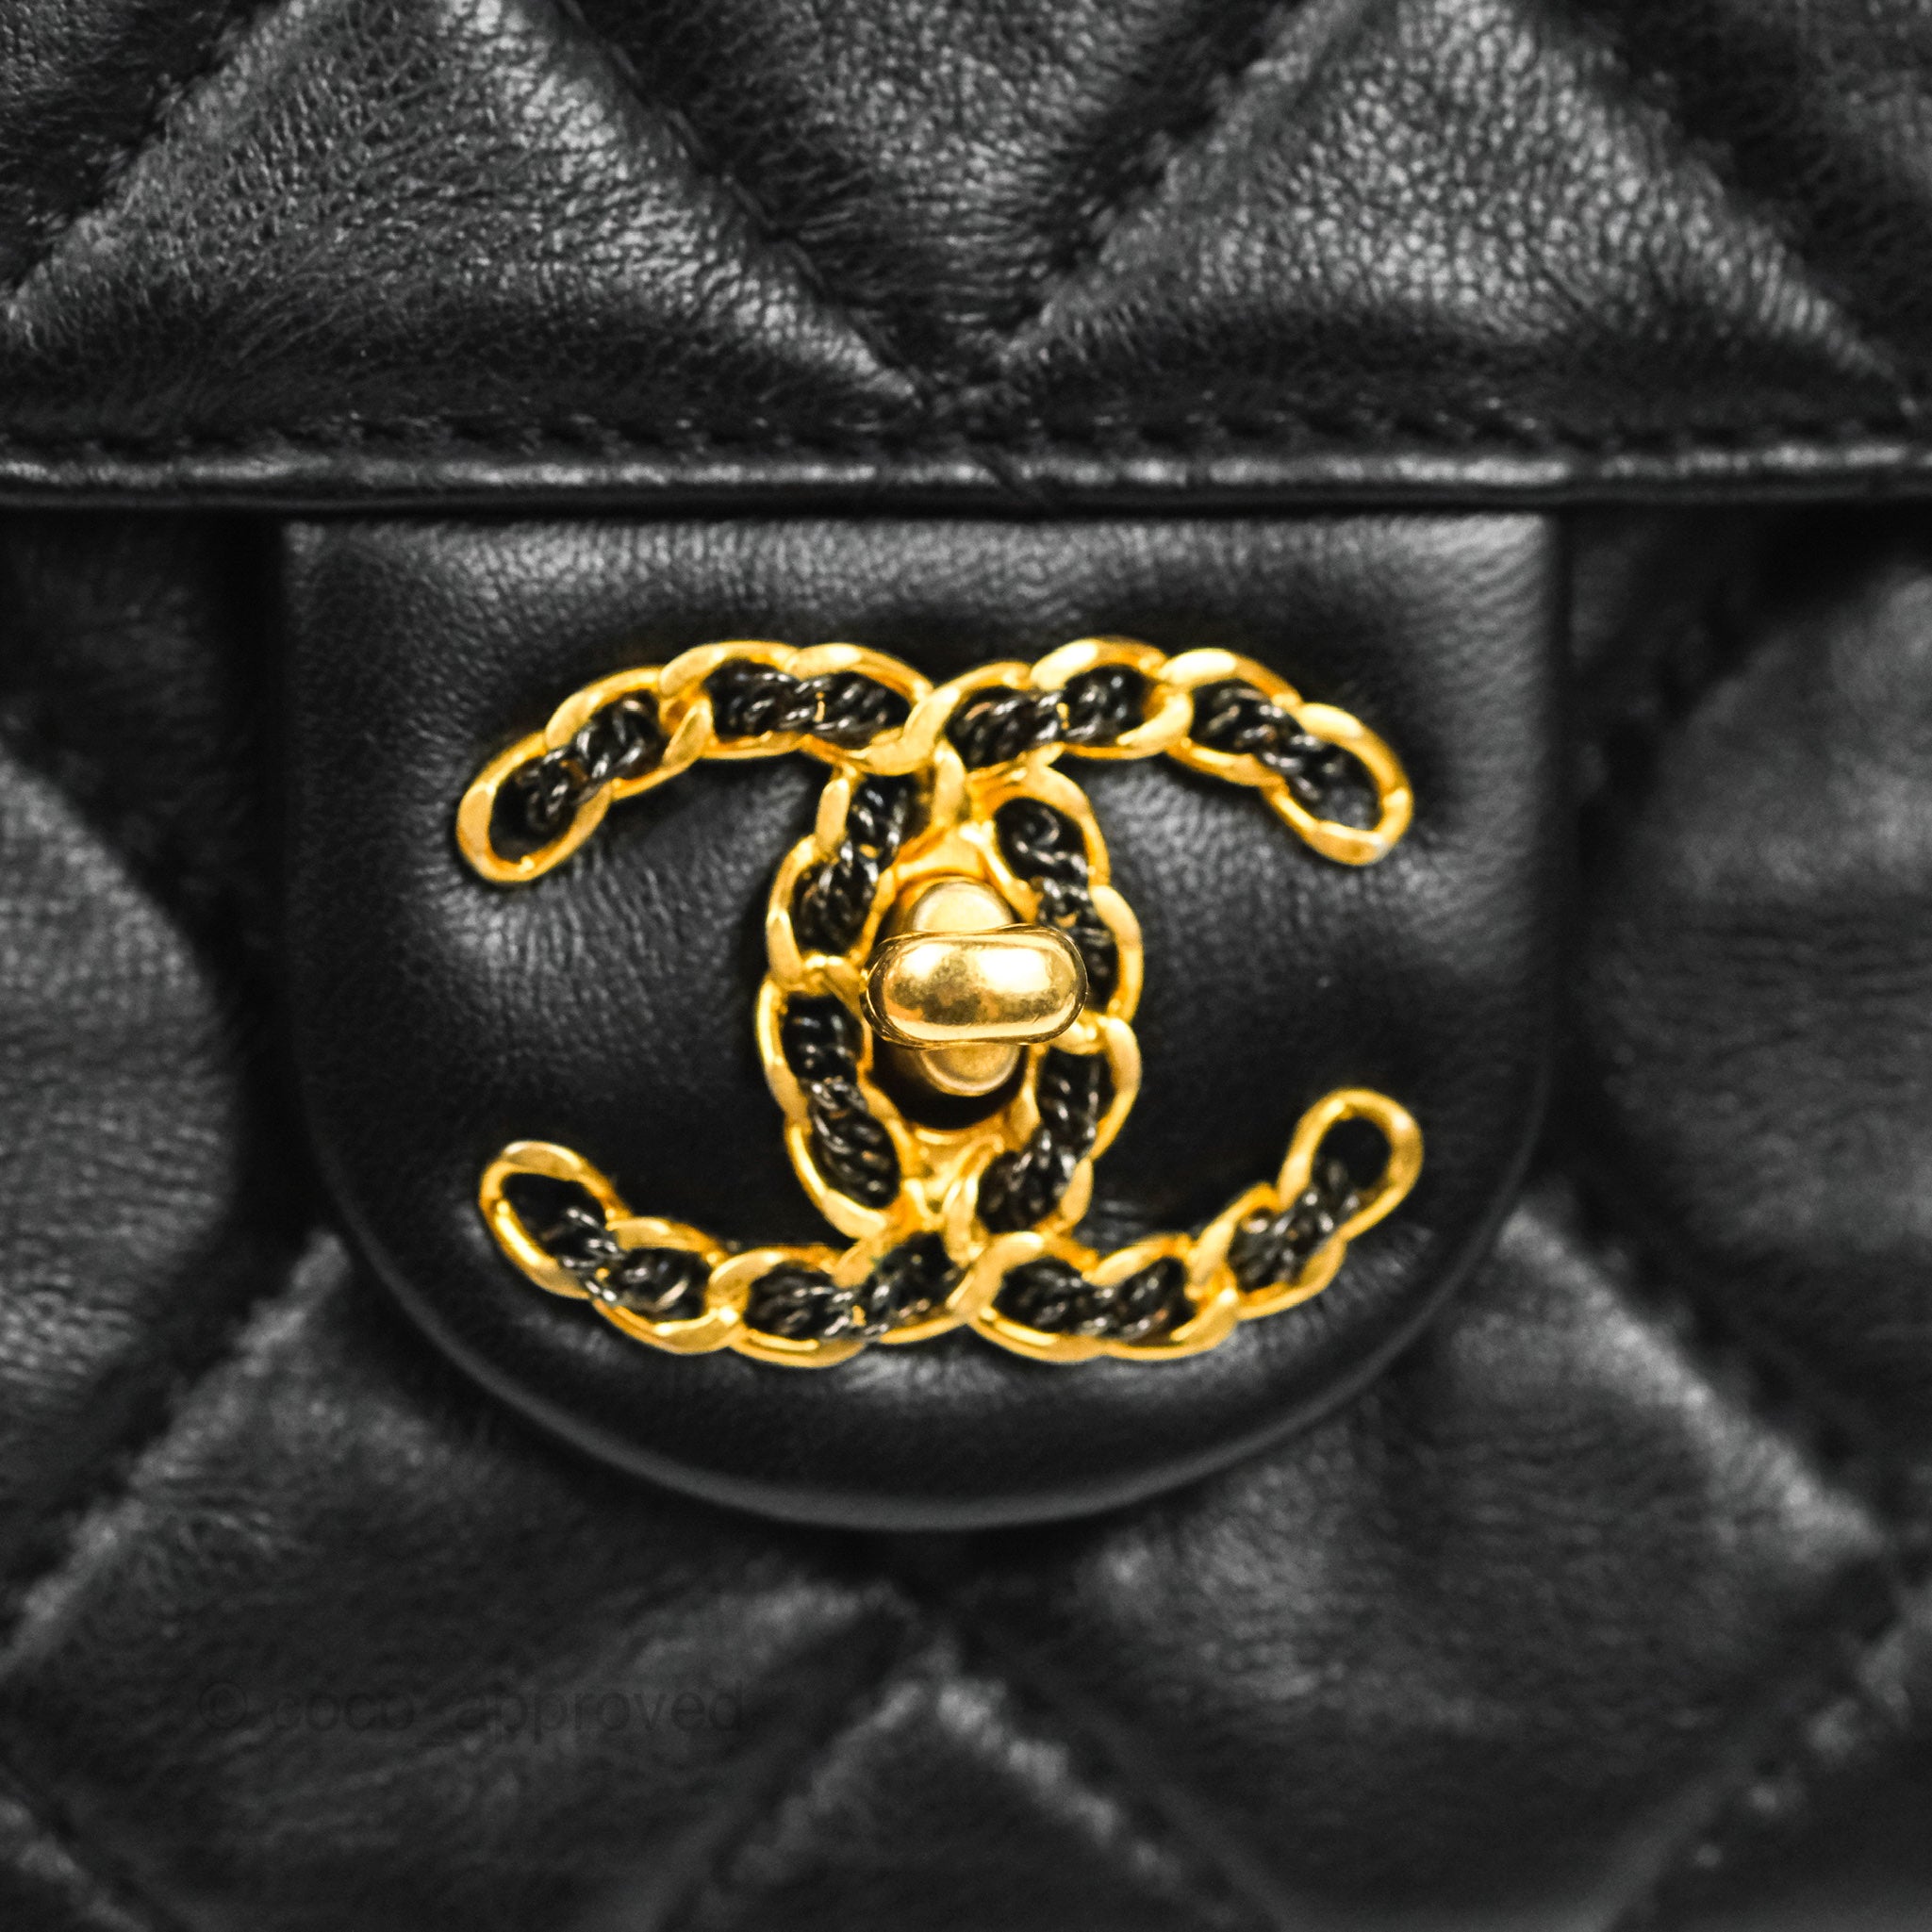 Chanel Logo Pearl Chain Flap Bag Black Lambskin Gold Hardware – Coco  Approved Studio